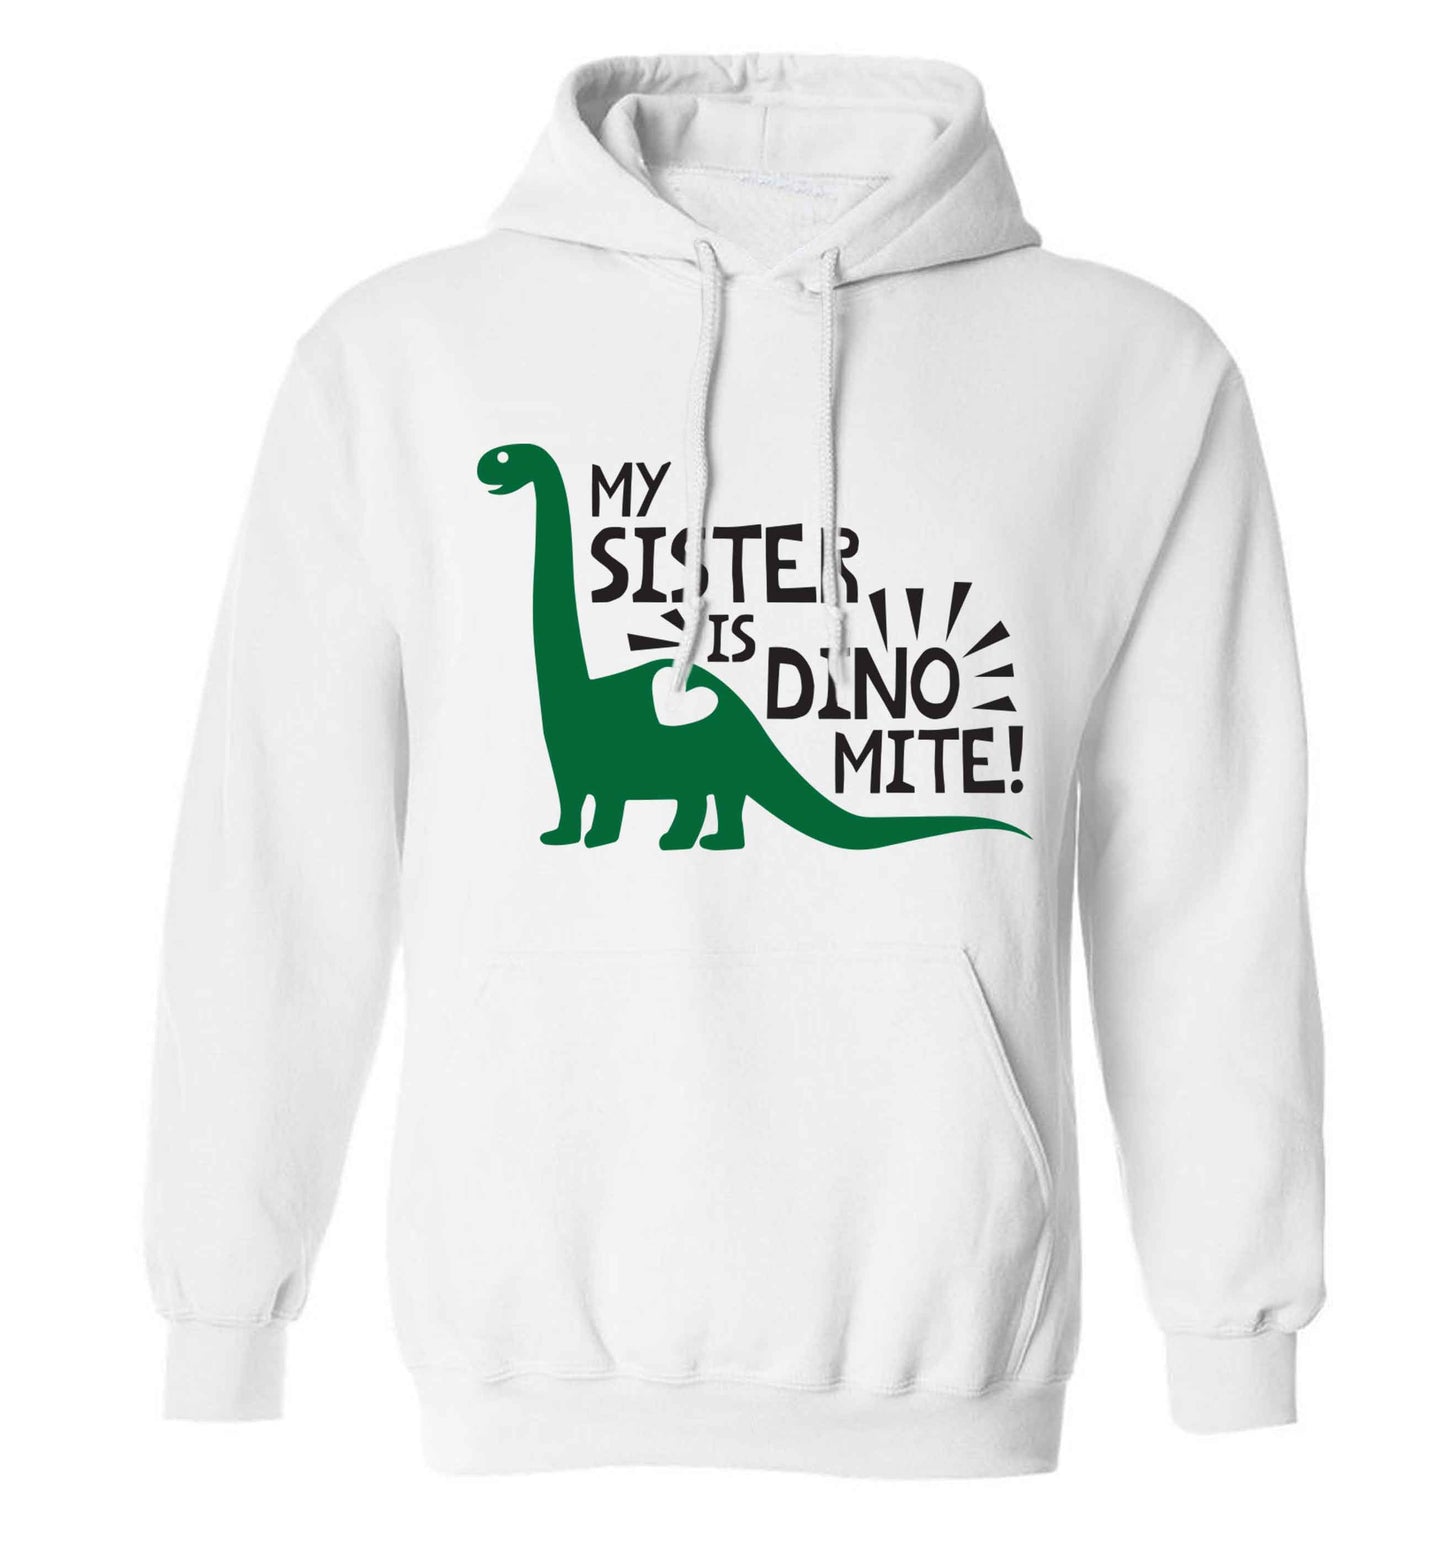 My sister is dinomite! adults unisex white hoodie 2XL